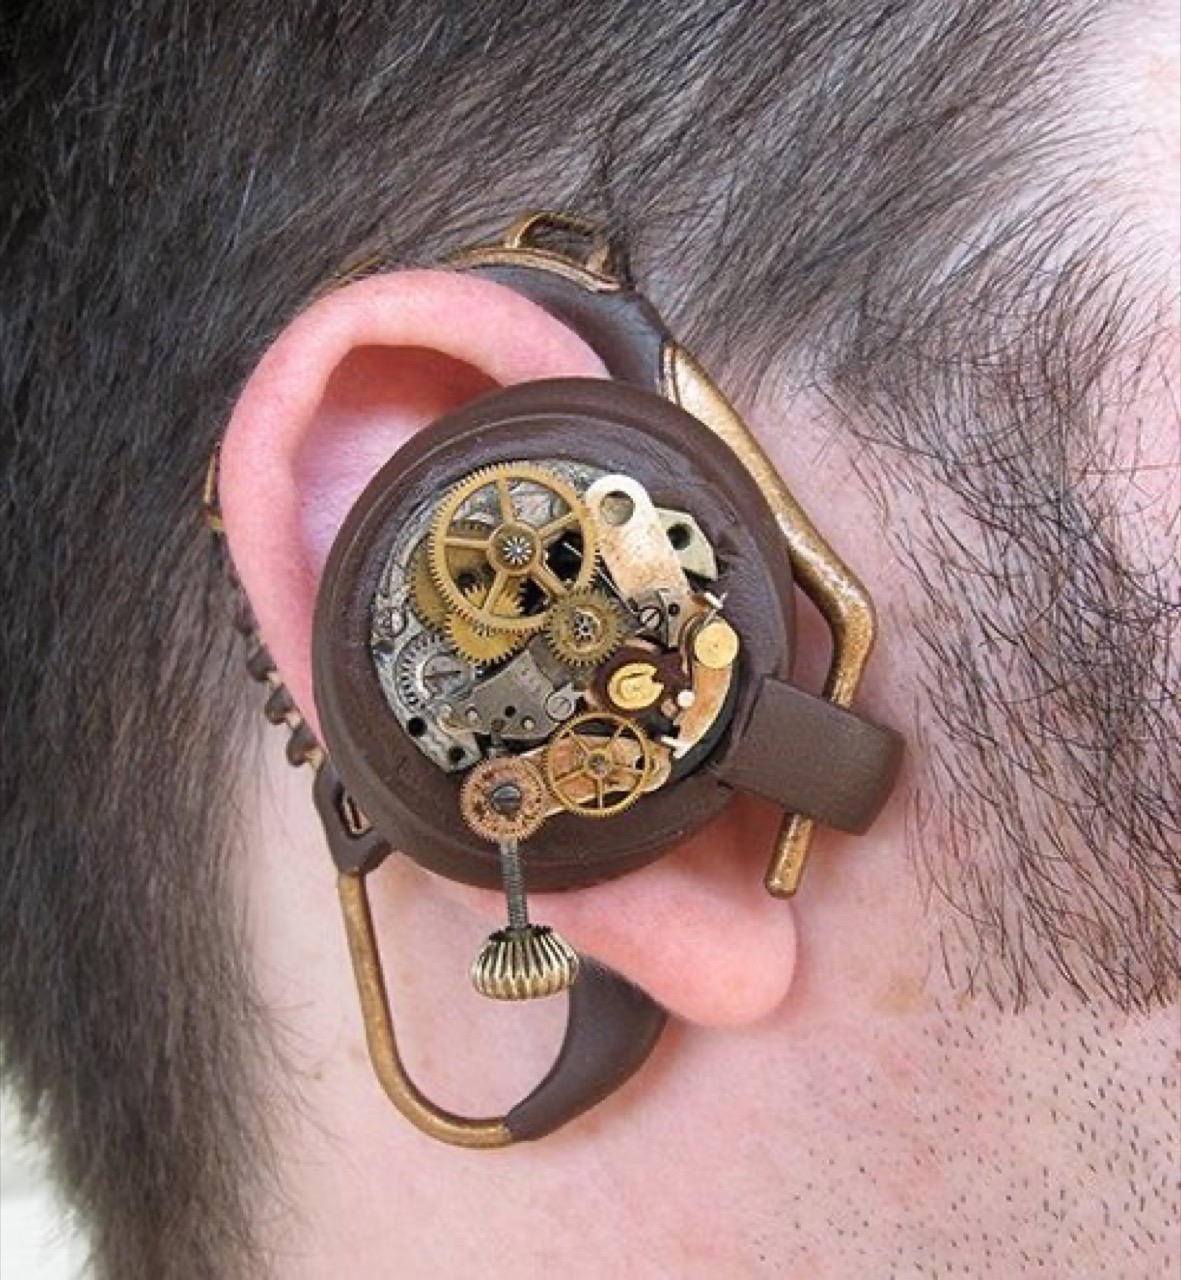 Test Your Steampunk Knowledge With This Bizarre Quiz!